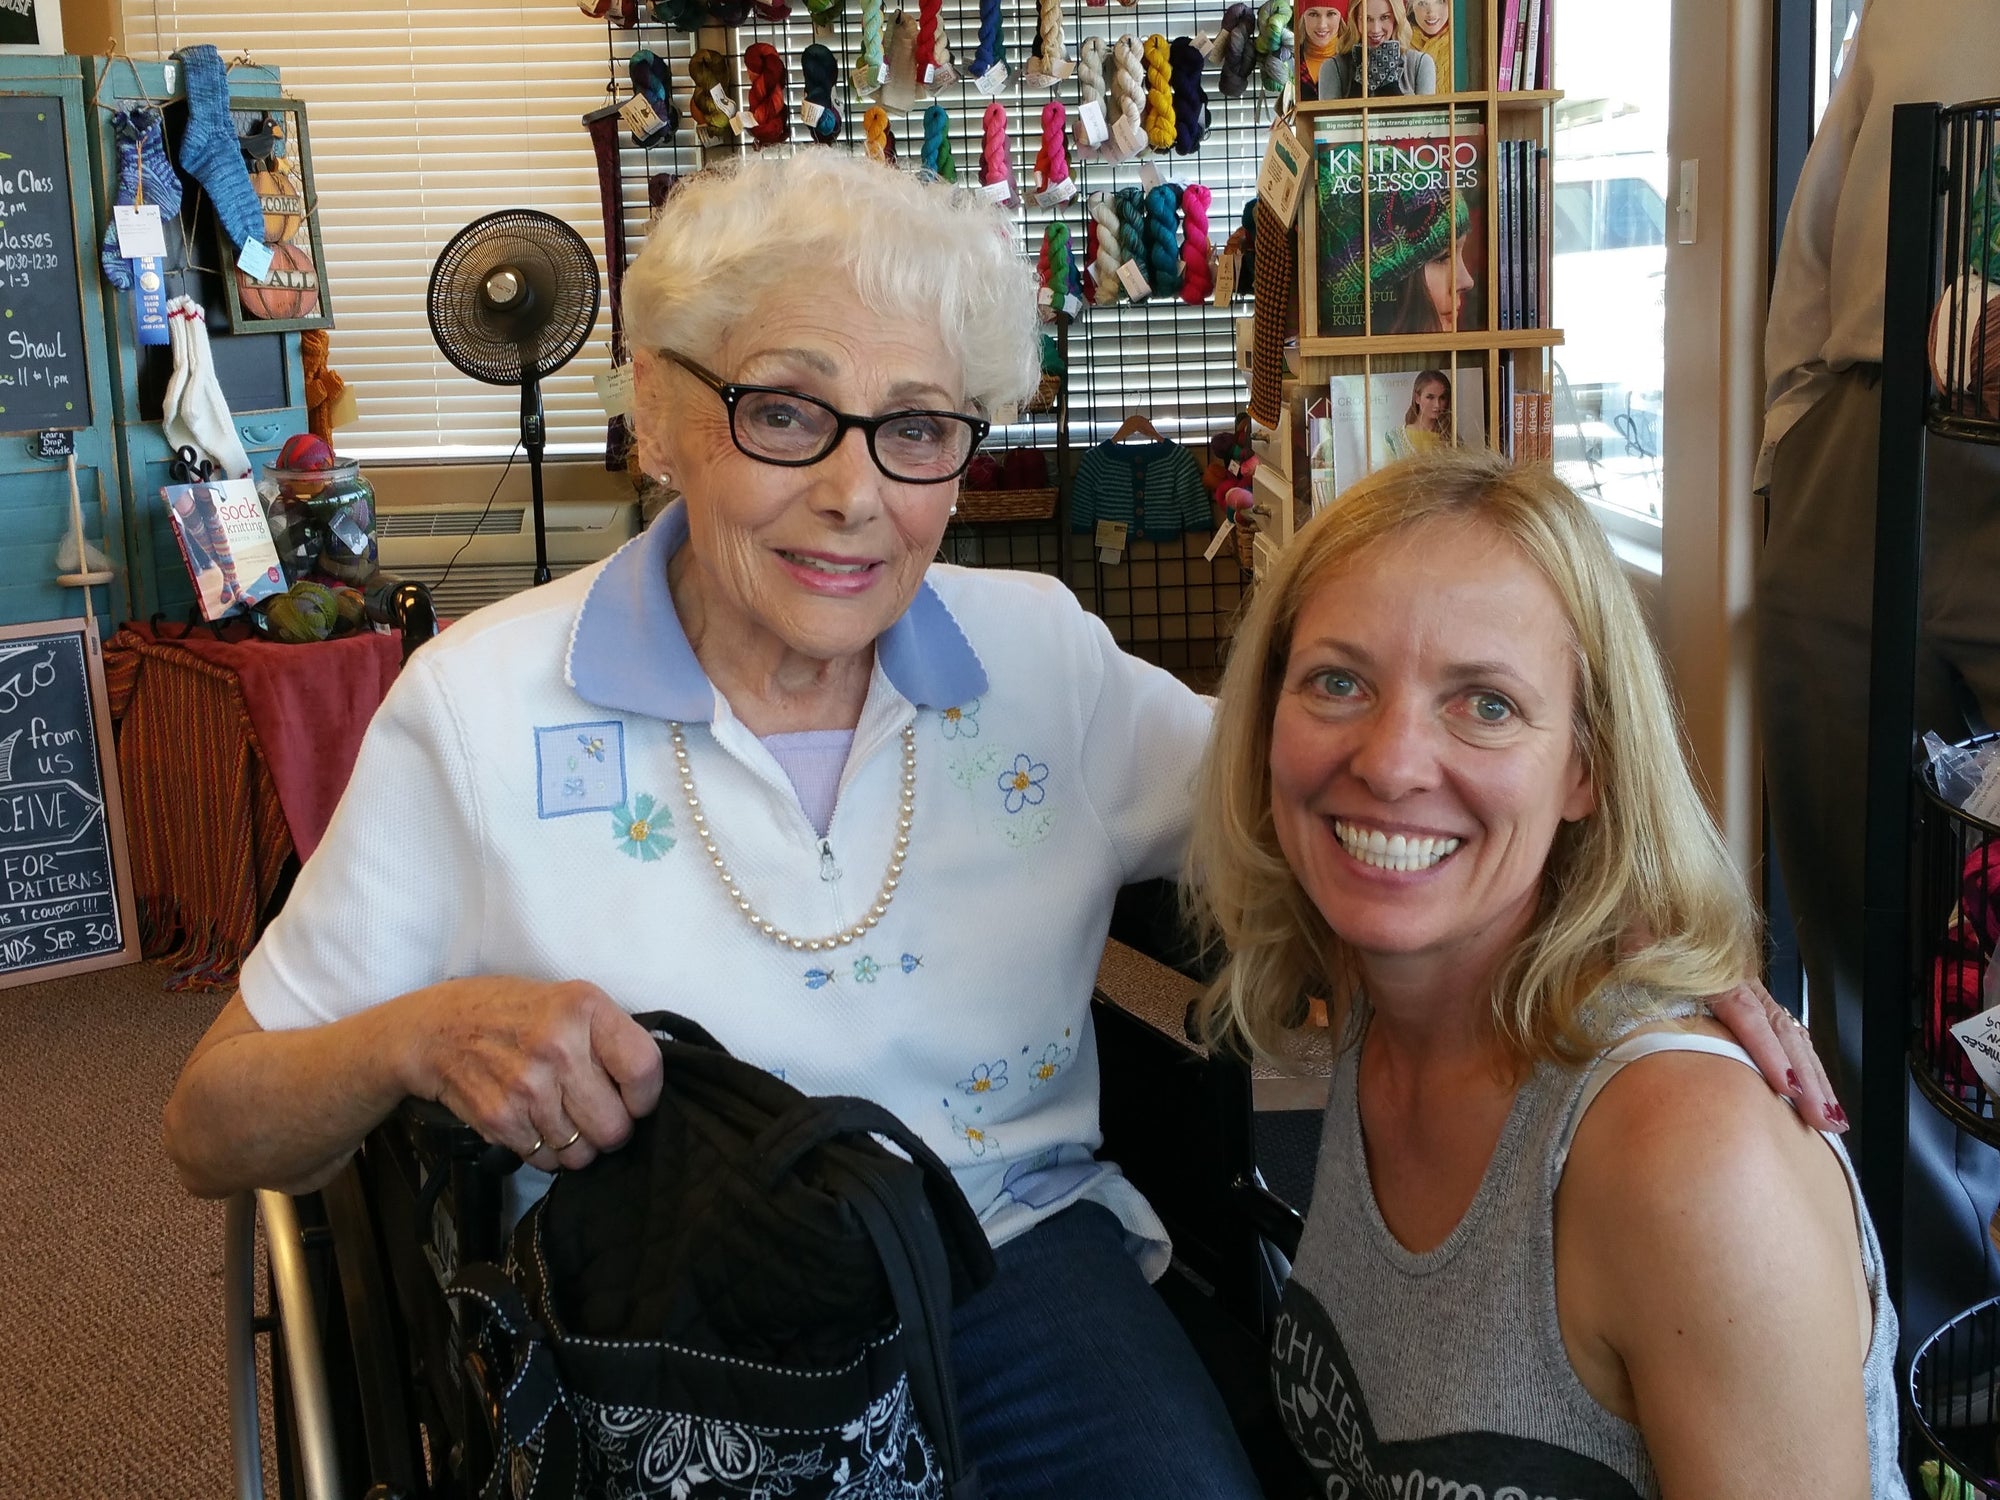 Knitting Helps Mentor a Healthy Lifestyle